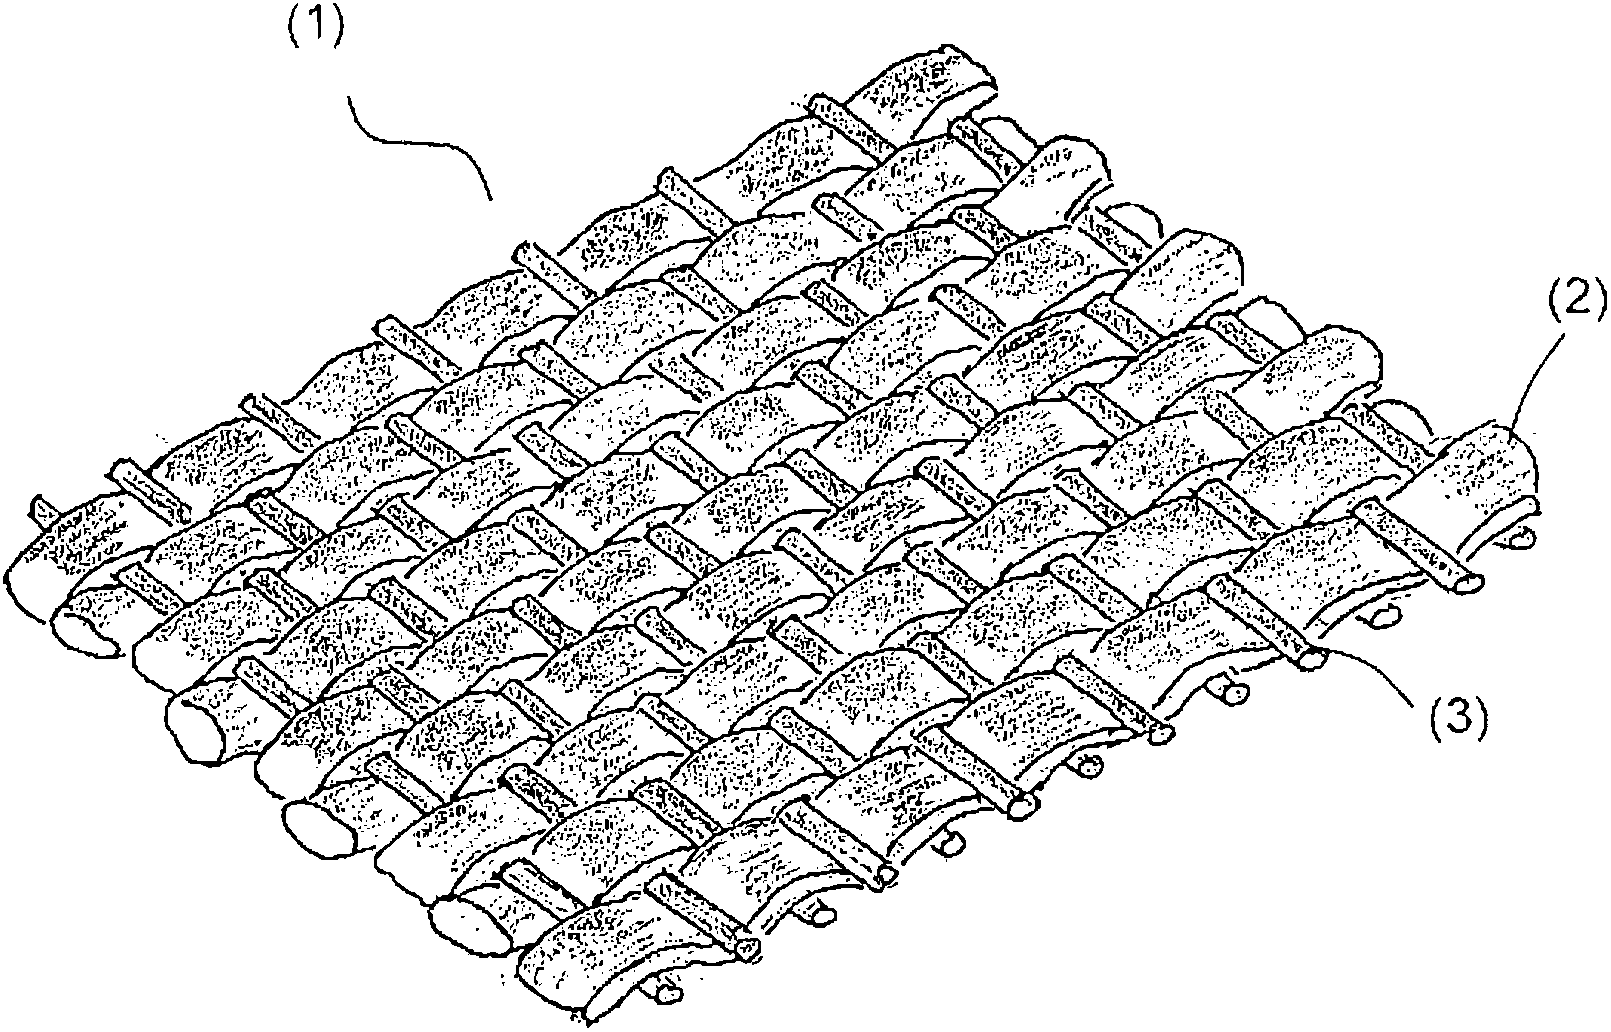 Woven filter fabric for a band filter